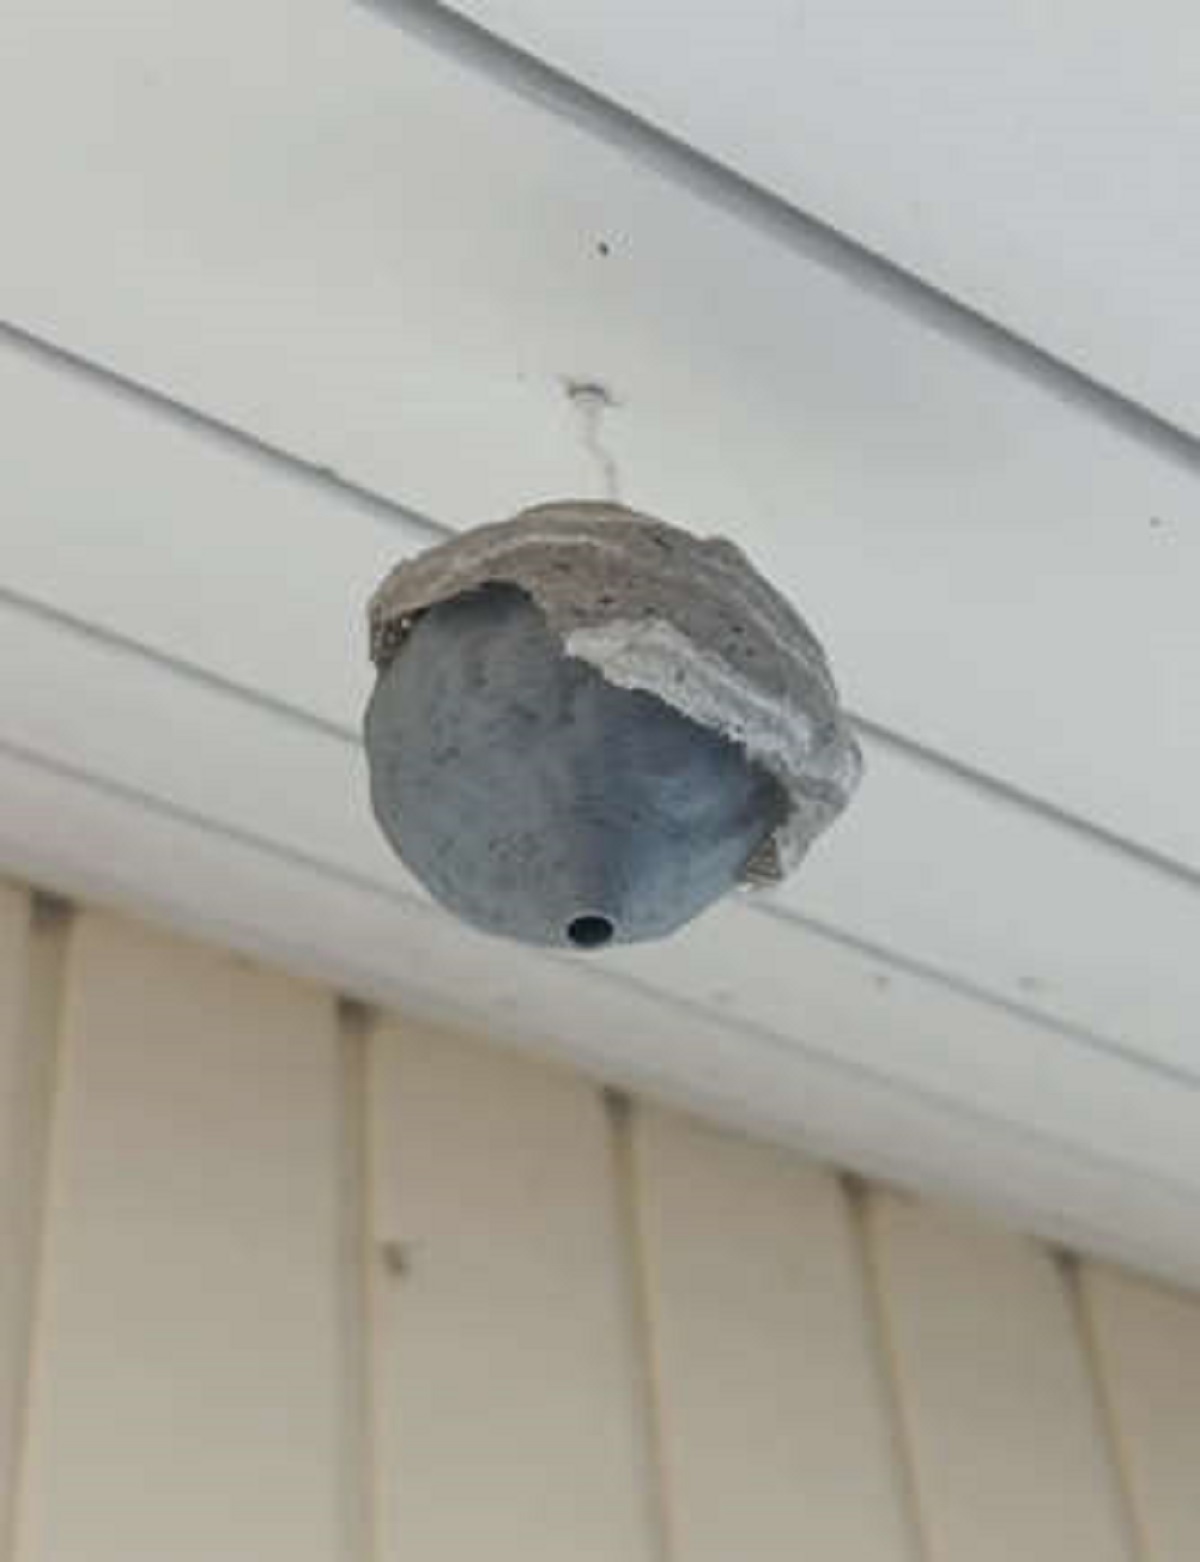 You hung a fake wasp’s nest. “I have a fake wasp nest and real wasps started to build on it.”